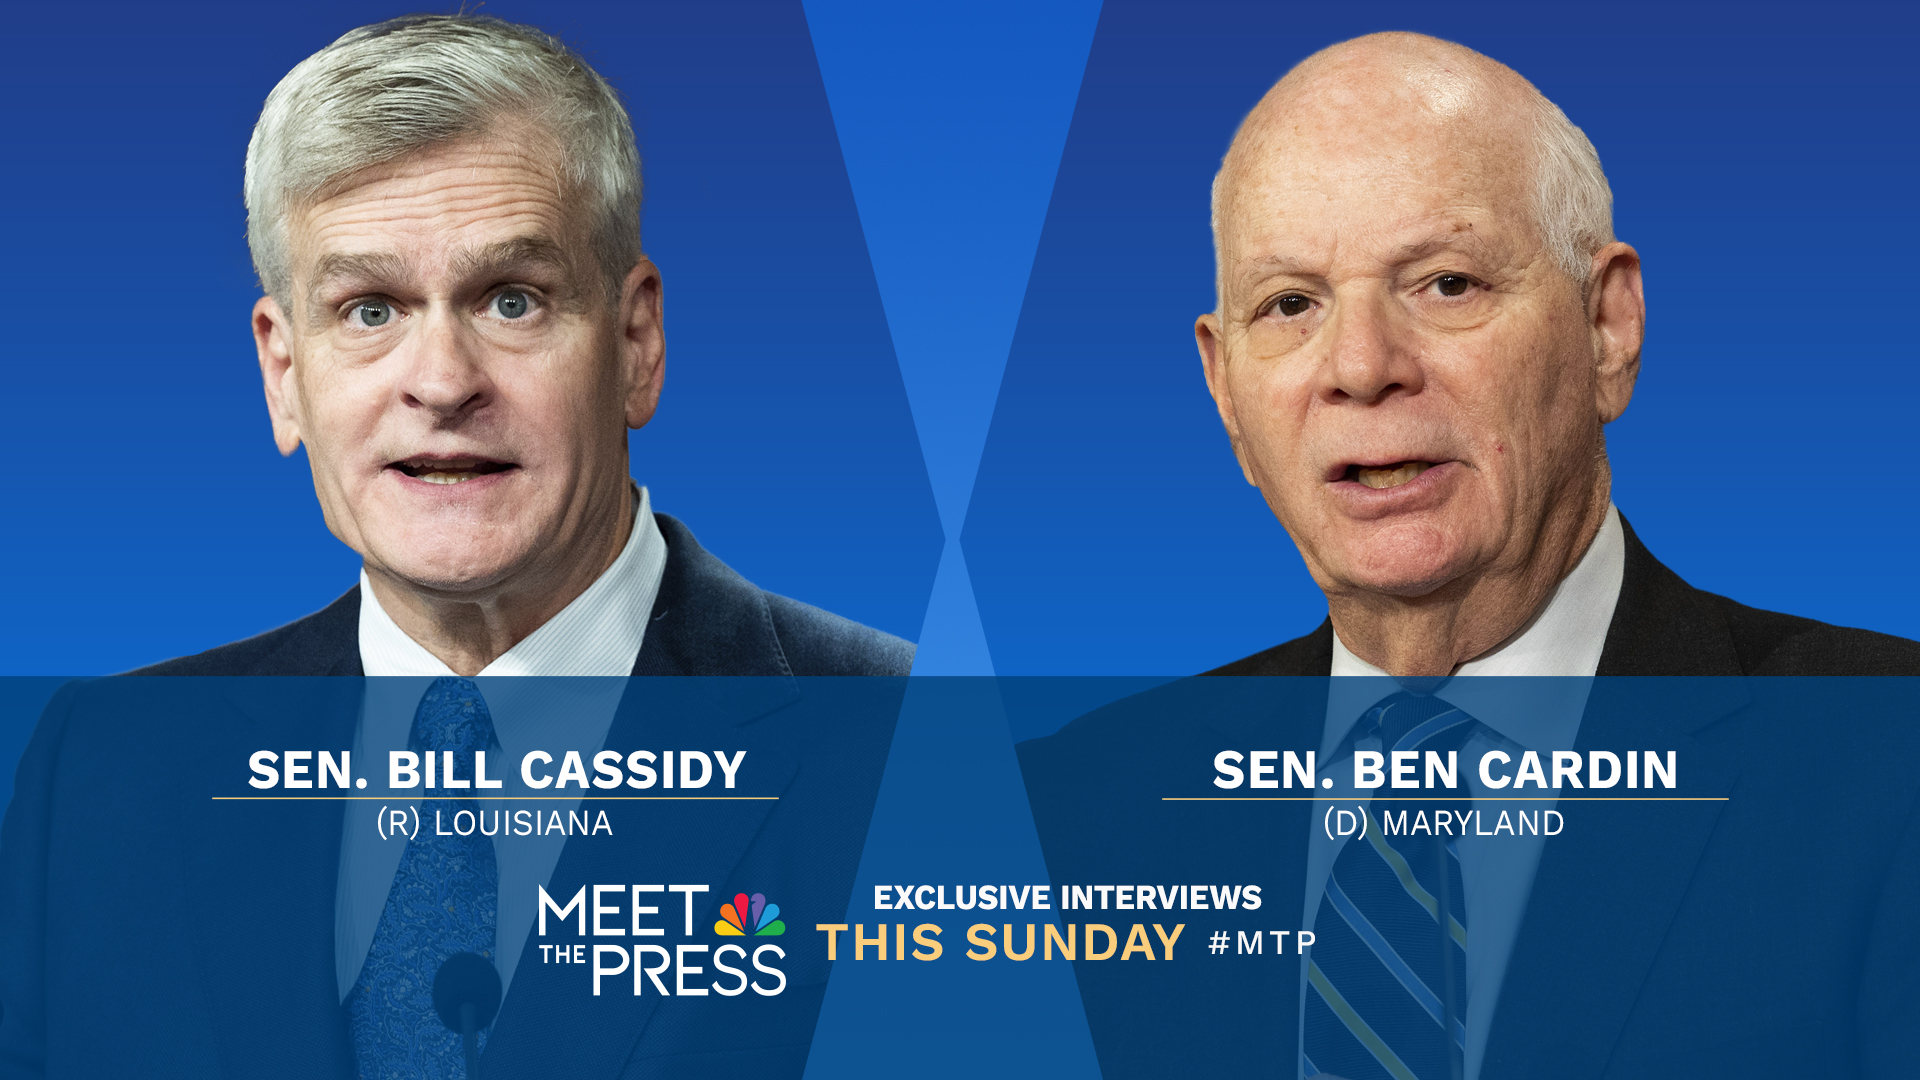 EXCLUSIVE INTERVIEWS WITH SENS. BEN CARDIN & BILL CASSIDY THIS SUNDAY ON “MEET THE PRESS WITH KRISTEN WELKER”